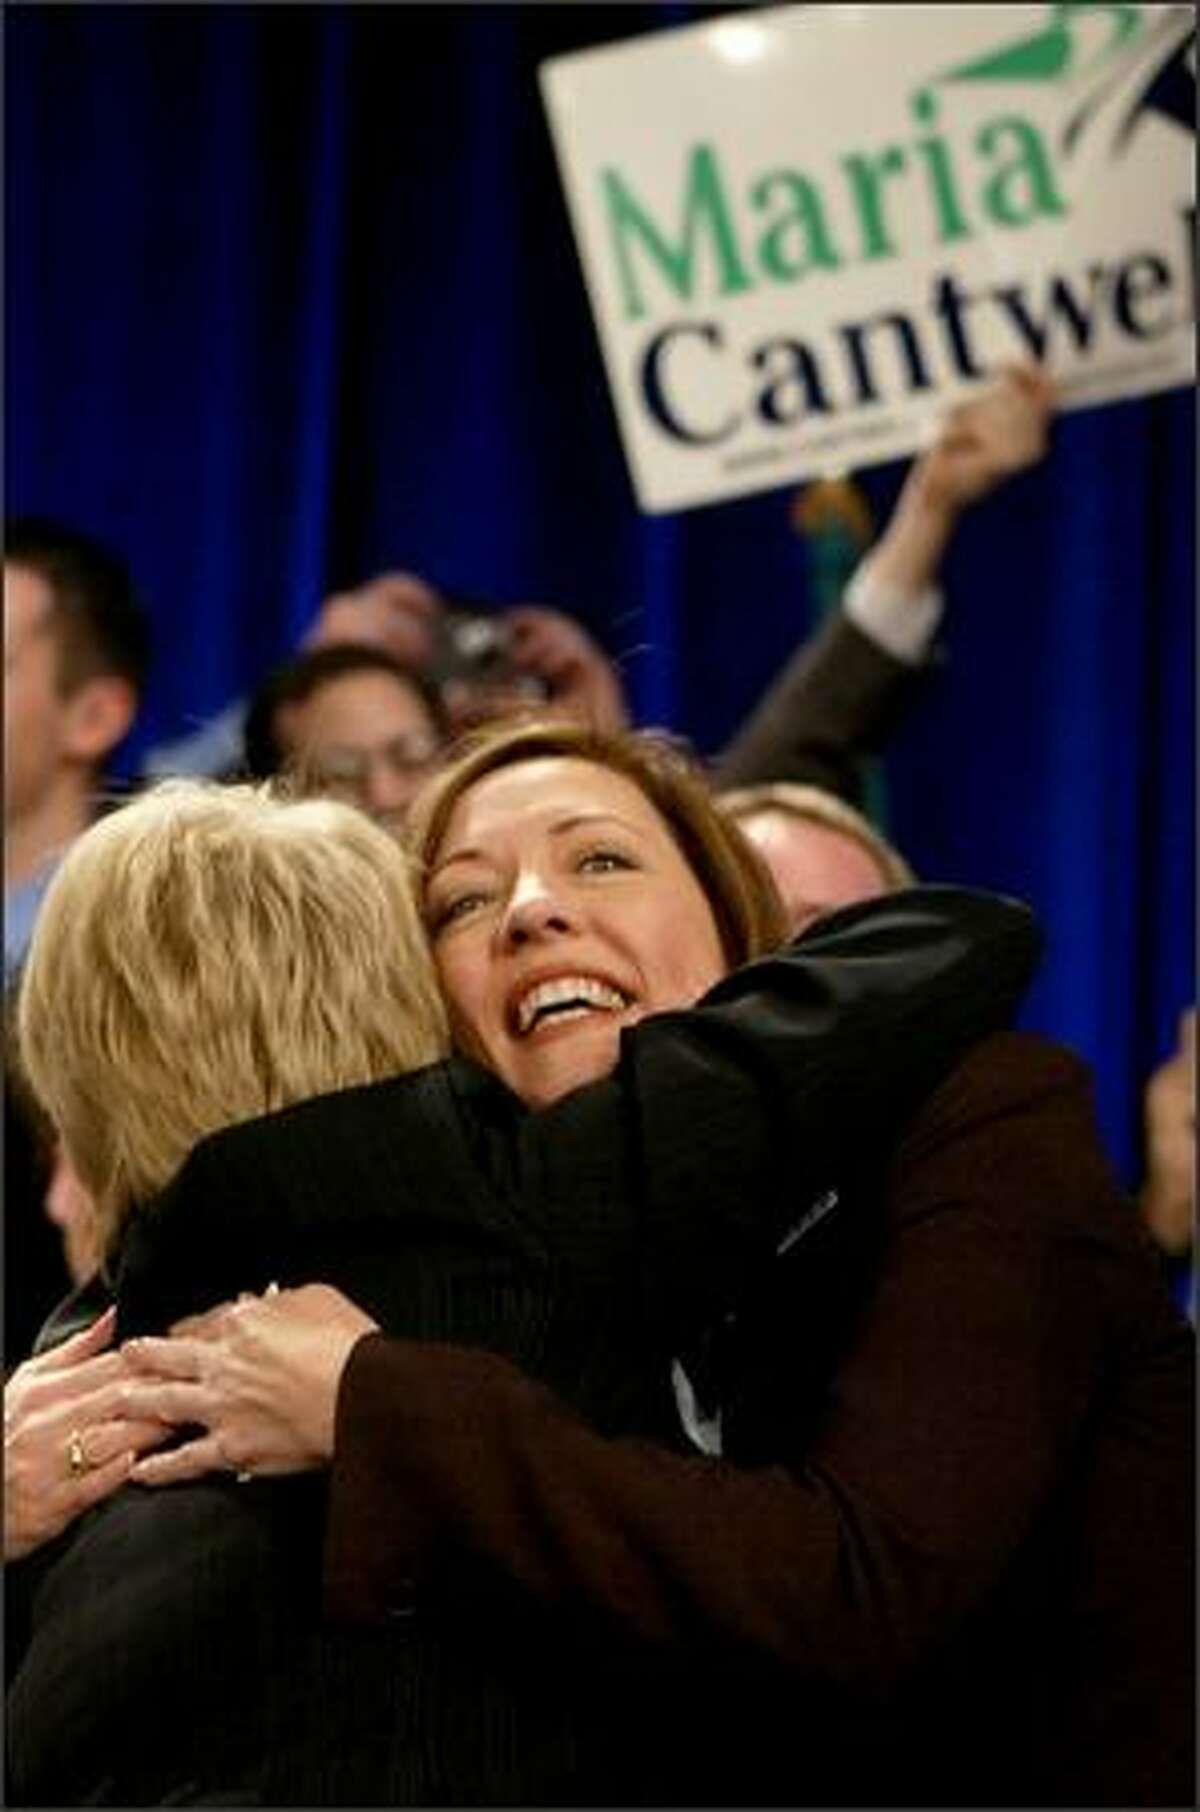 Democratic Sen. Maria Cantwell, running for reelection against Mike McGavick, hugs U.S. Sen. Patty Murray during an election party on Tuesday at the Sheraton Hotel in Seattle.